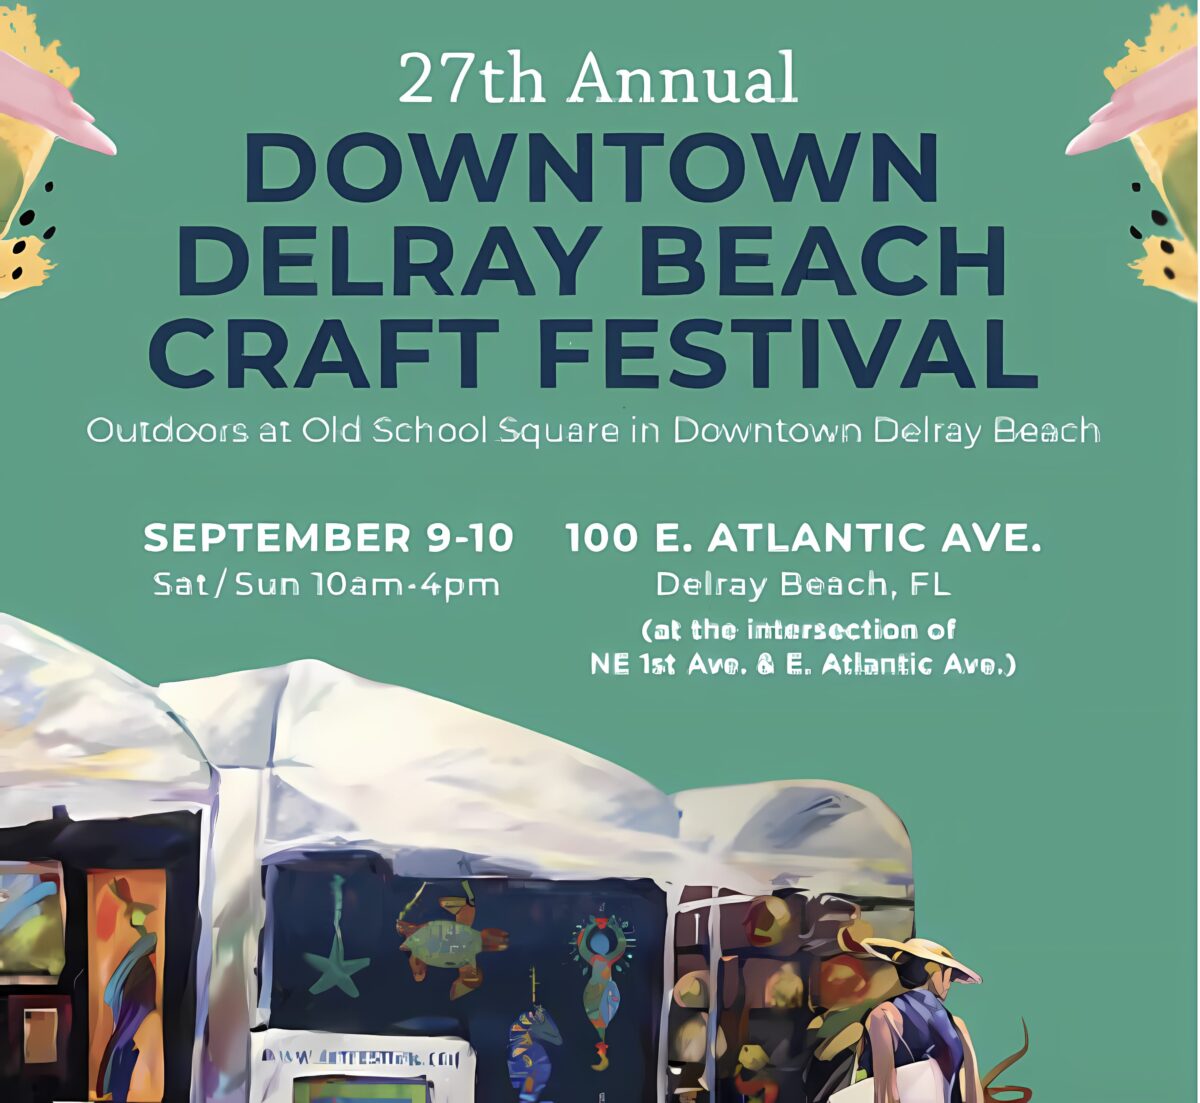 Downtown Delray Beach Craft Festival has free admission South Florida